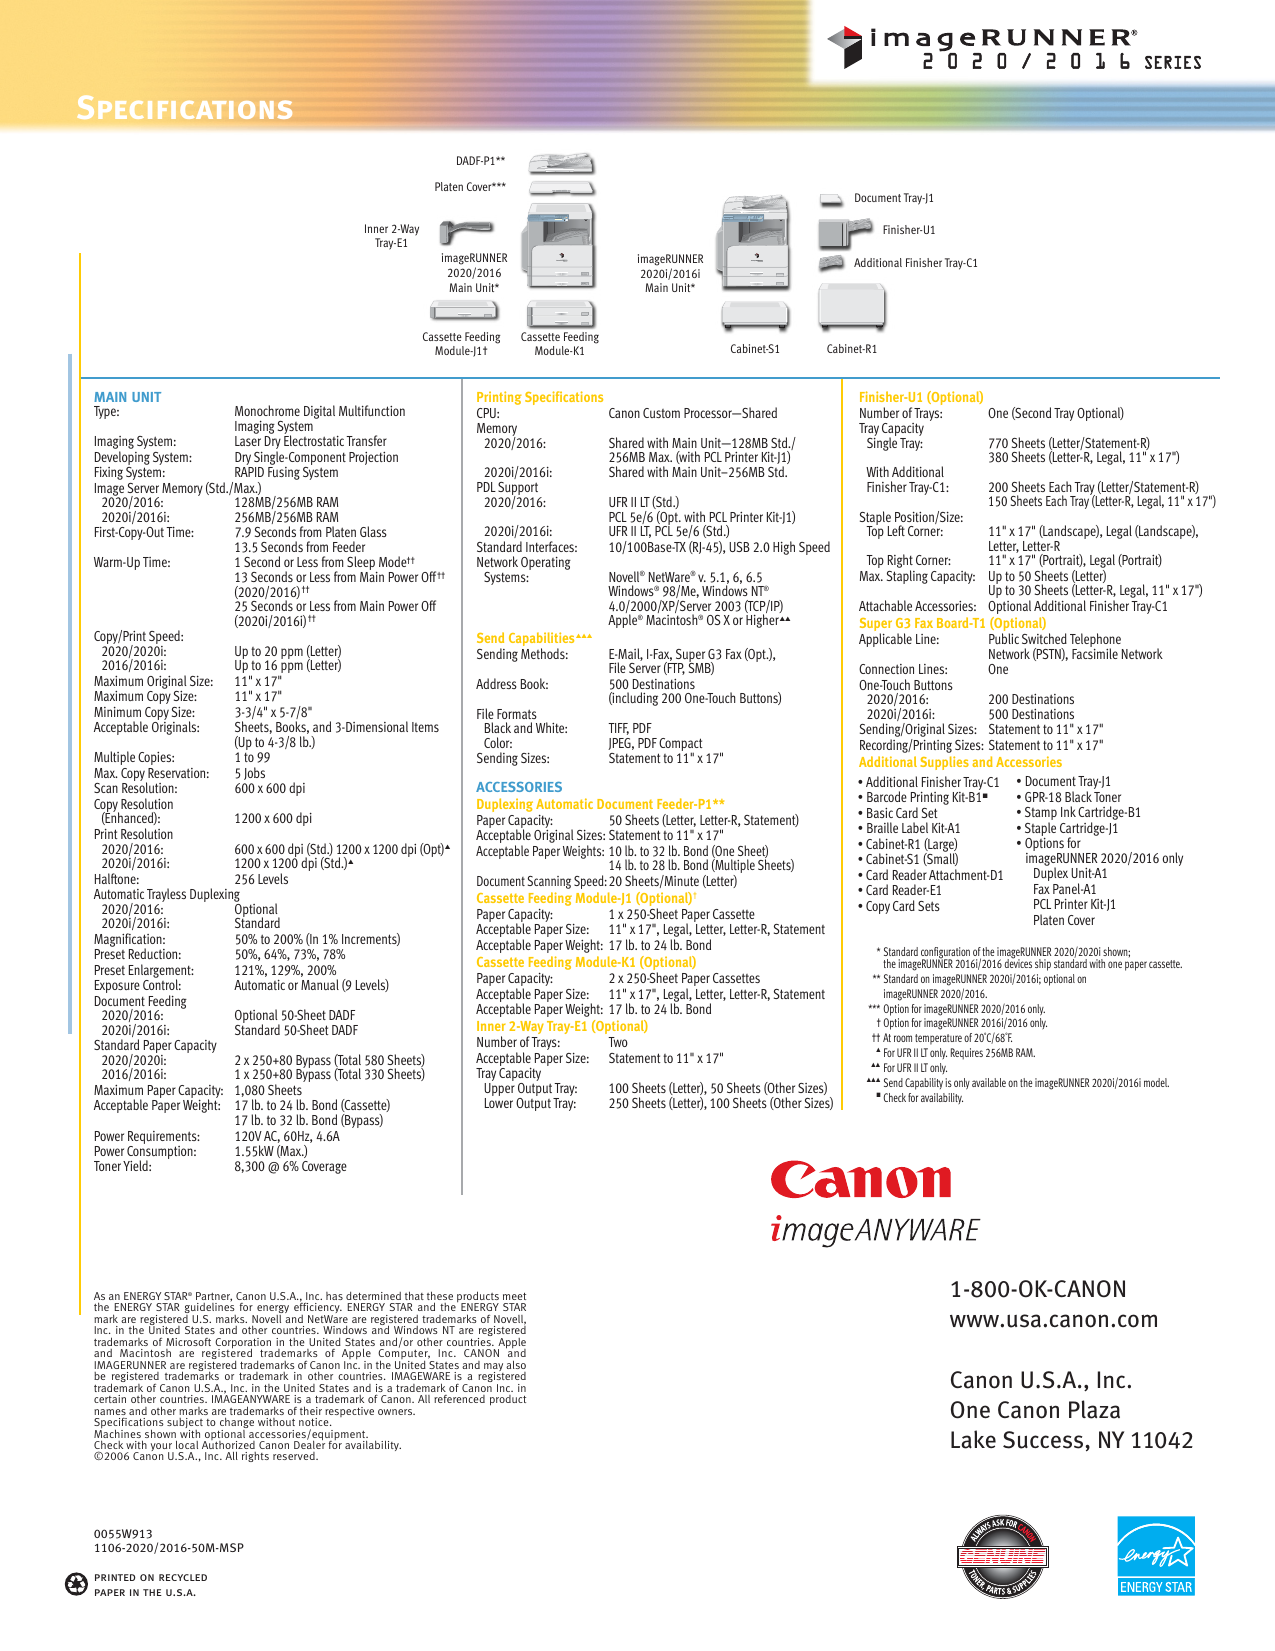 Page 6 of 6 - Canon Canon-Imagerunner-2016I-Brochure- IR2020-2016Brochure  Canon-imagerunner-2016i-brochure